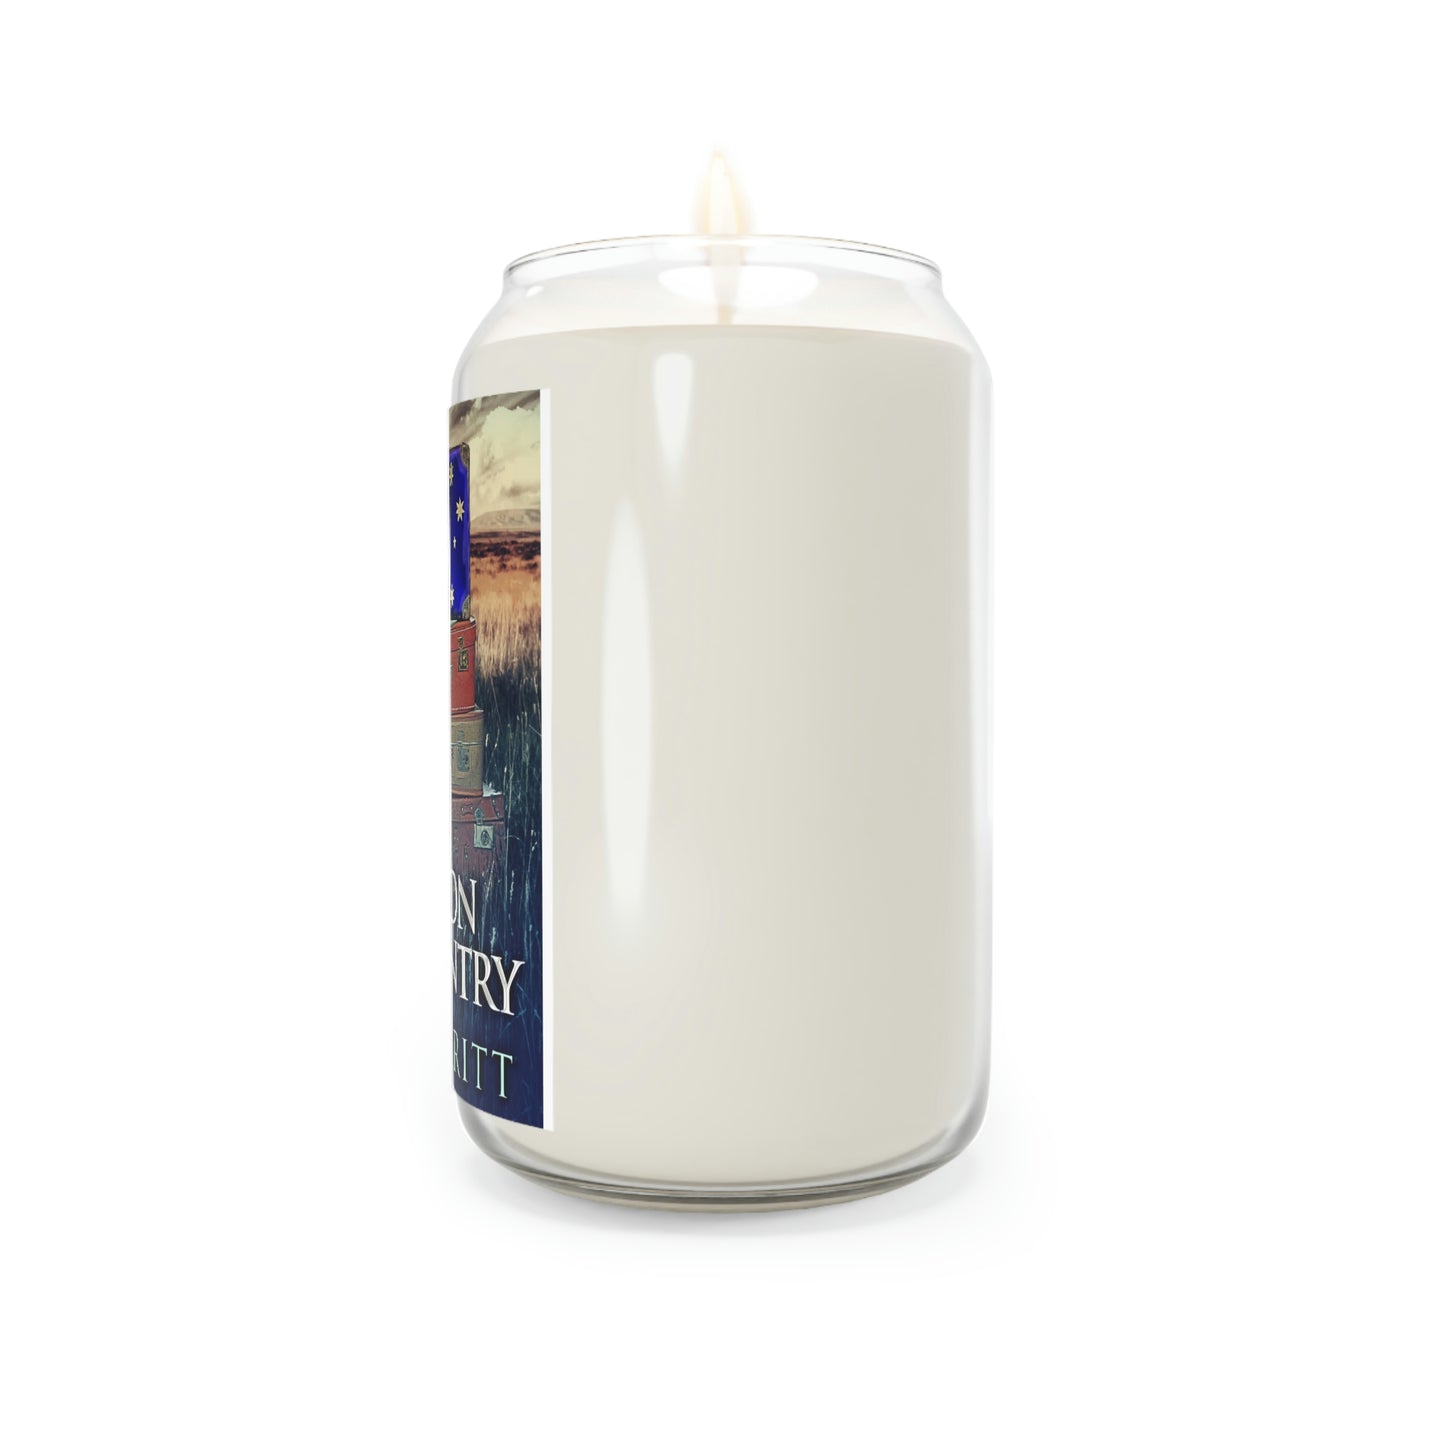 A Question Of Country - Scented Candle